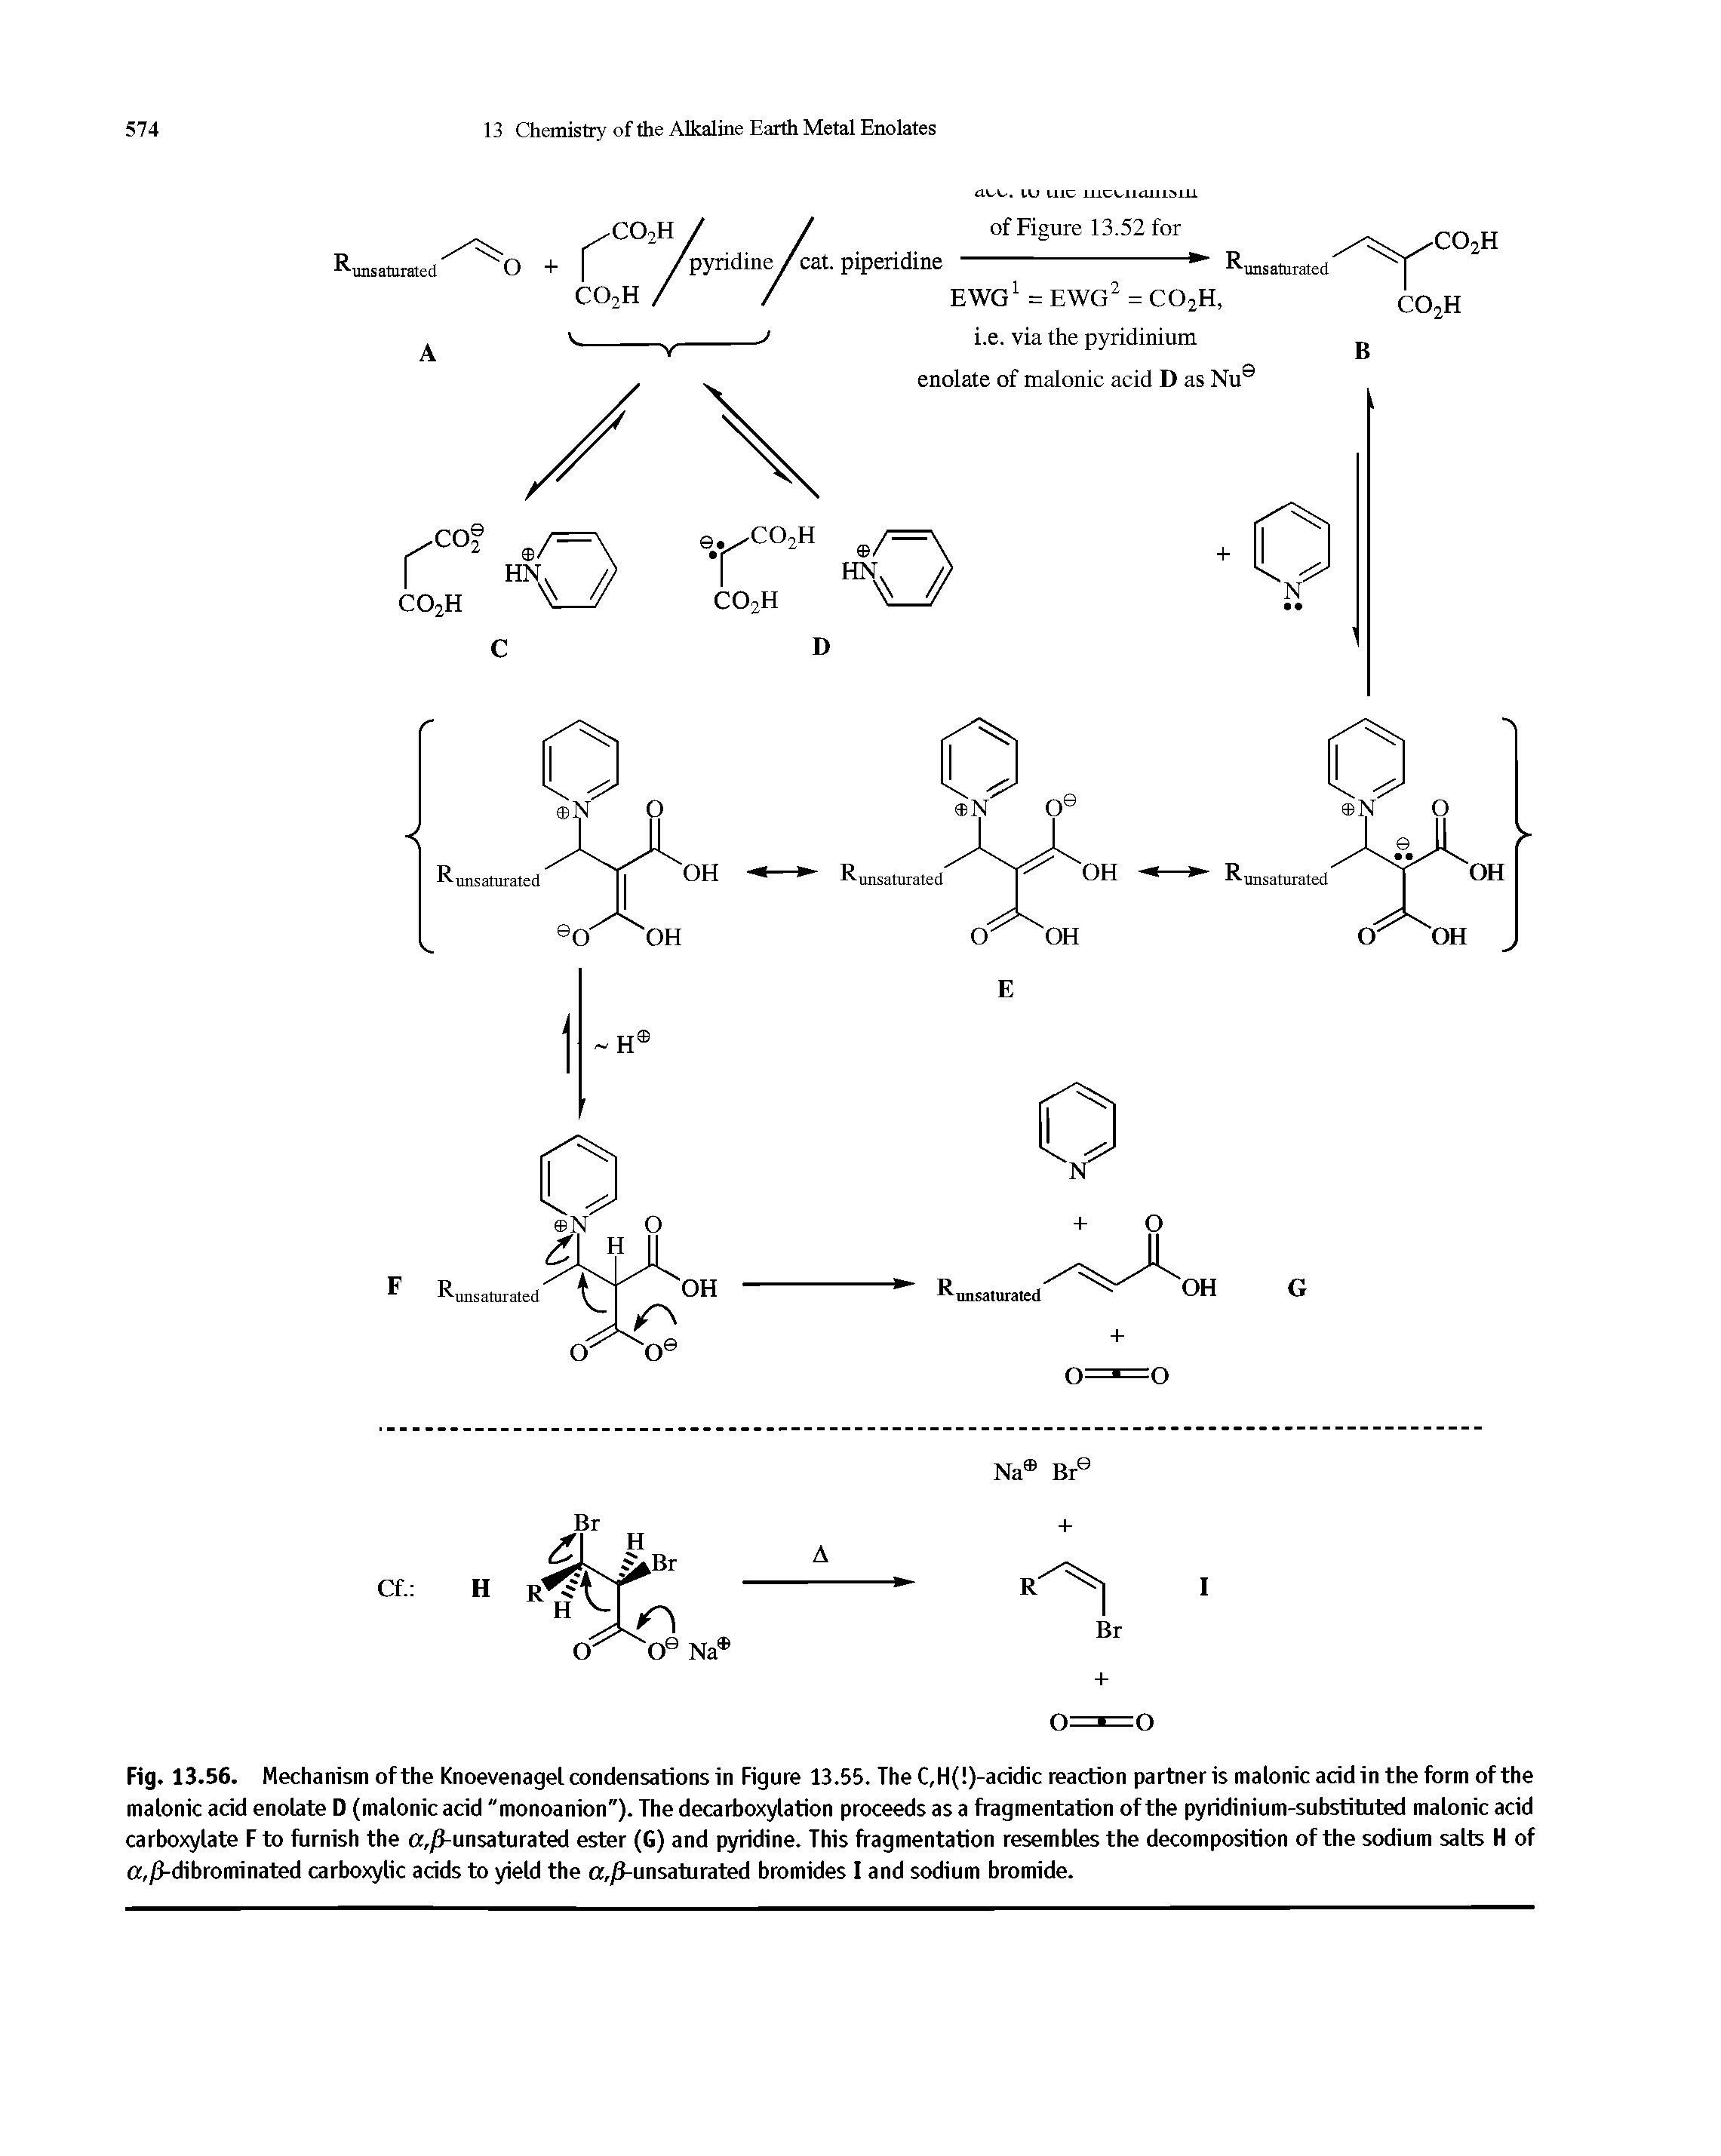 Fig. 13.56. Mechanism of the Knoevenagel condensations in Figure 13.55. The C,H( )-acidic reaction partneris malonicacidin the form of the malonic acid enolate D (malonic acid "monoanion"). The decarboxylation proceeds as a fragmentation of the pyridinium-substituted malonic acid carboxylate F to furnish the ,/Tunsaturated ester (G) and pyridine. This fragmentation resembles the decomposition of the sodium salts H of ,/Tdibrominated carboxylic acids to yield the a,/Tunsaturated bromides I and sodium bromide.